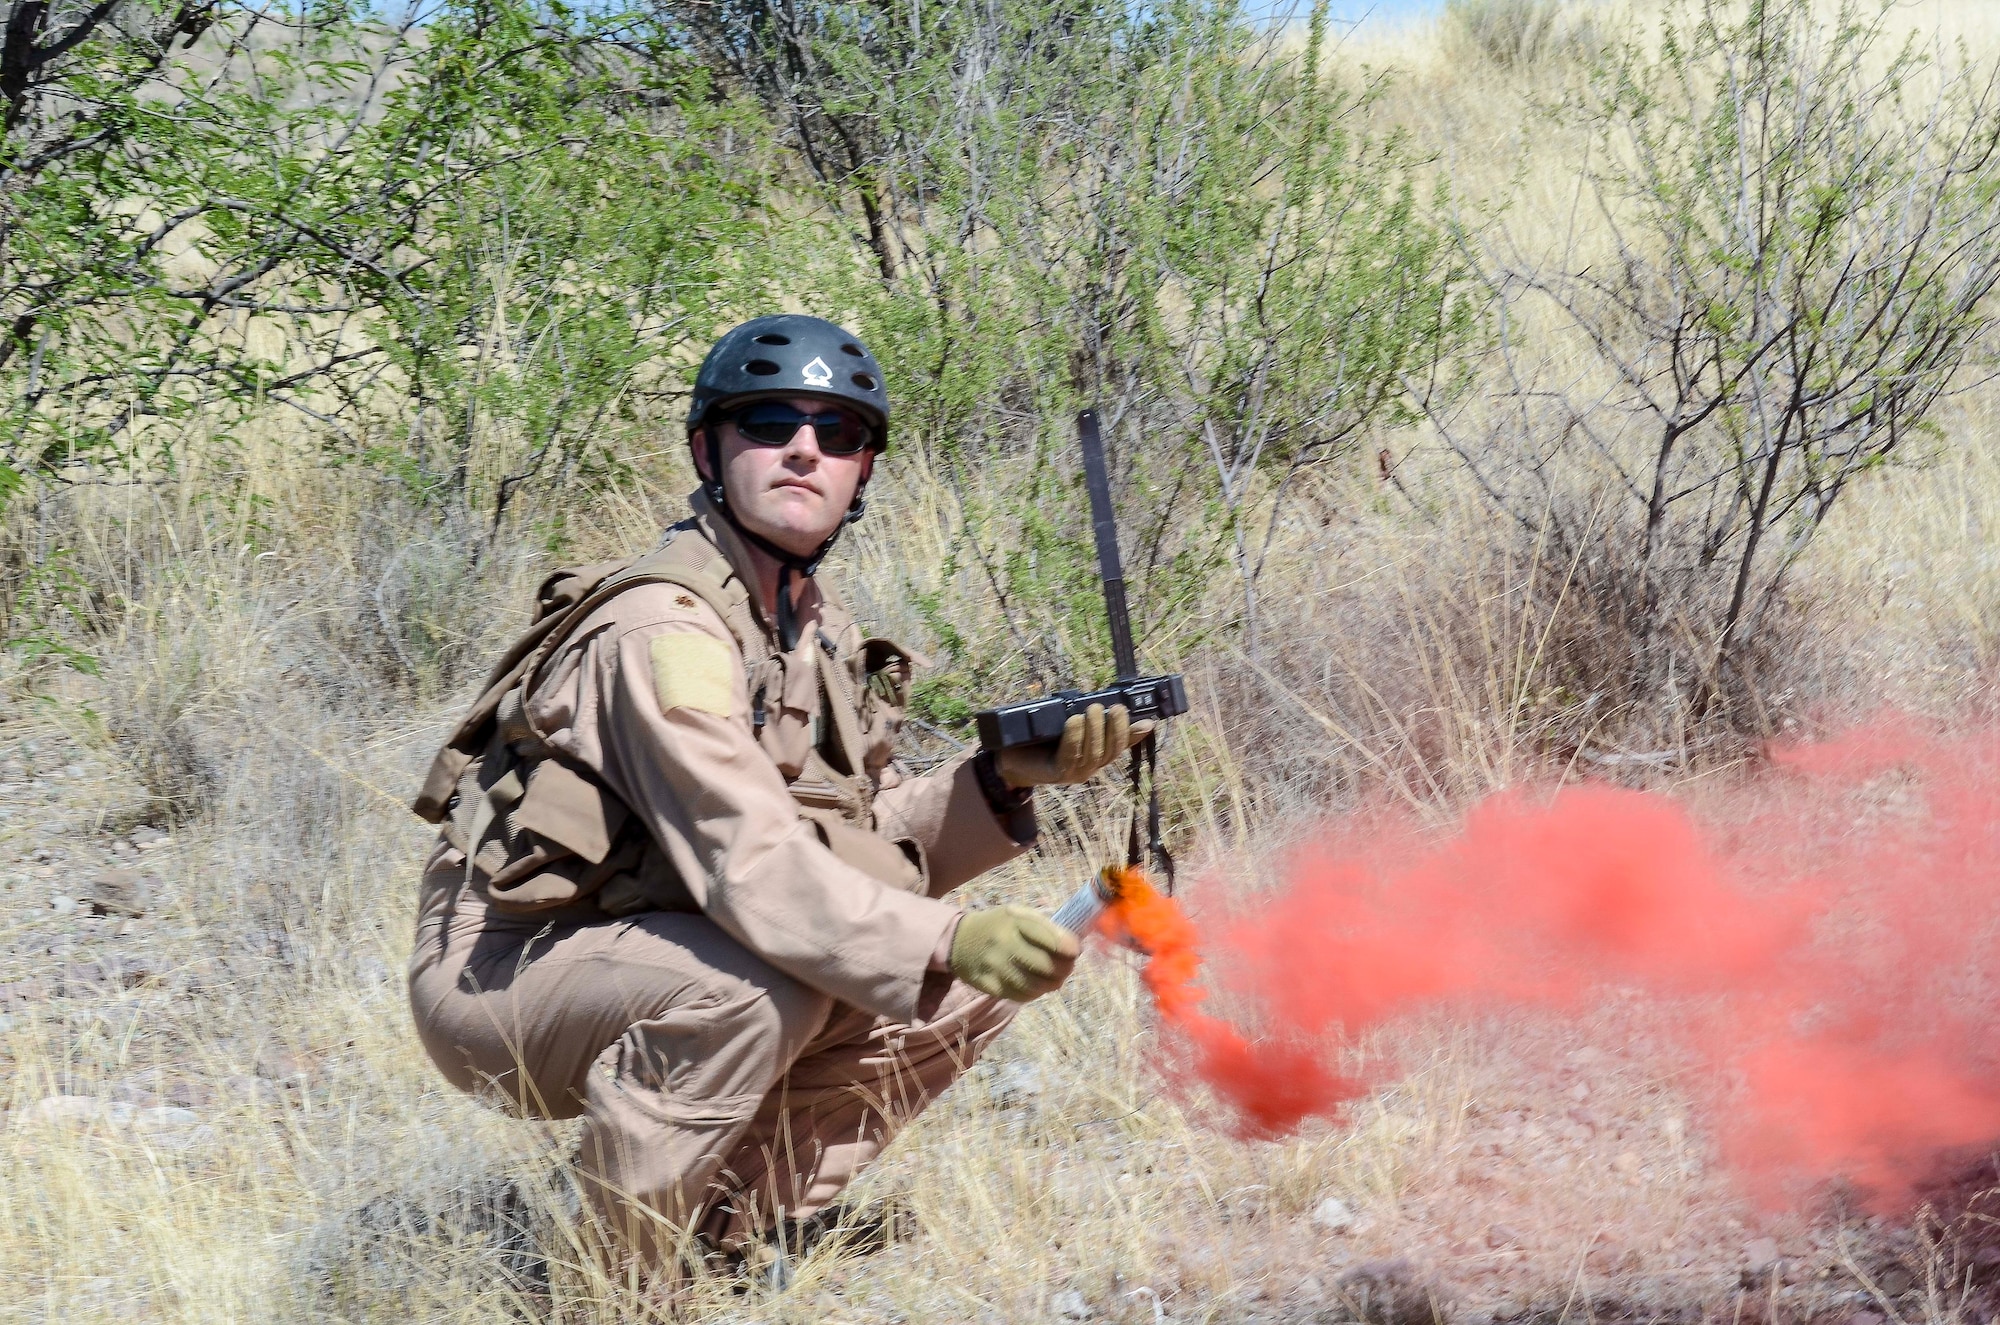 Maj. John Reed, 12th Air Force (Air Forces Southern) executive officer, uses a flare gain the attention of nearby aircraft during a Combat Search and Rescue Exercise in Southern Ariz., April 29, 2014. The main objective of this exercise was to effectively integrate communications across joint platforms to authenticate, locate and protect isolated personnel while successfully extracting them. (U.S. Air Force photo by Staff Sgt. Adam Grant/Released)